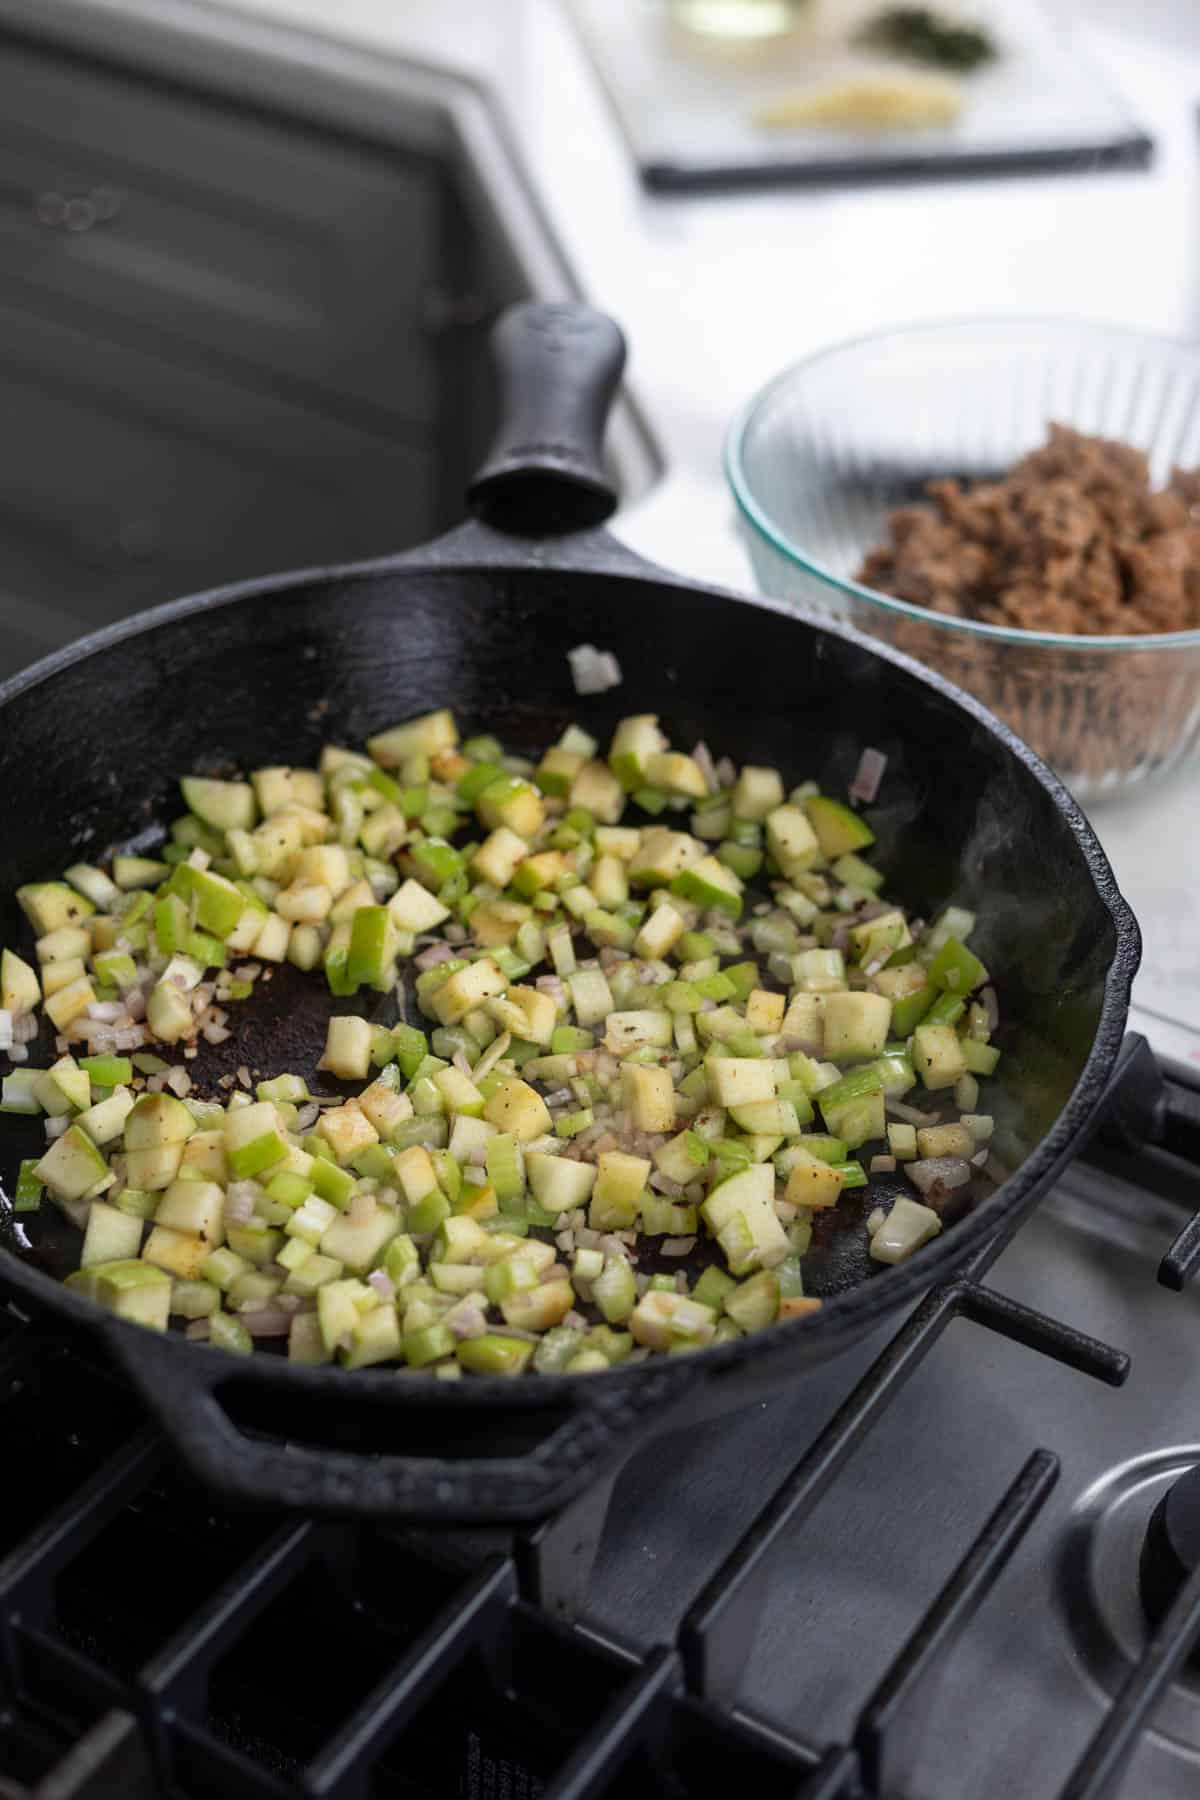 apples, celery, shallot, and herbs cooking in a cast iron skillet